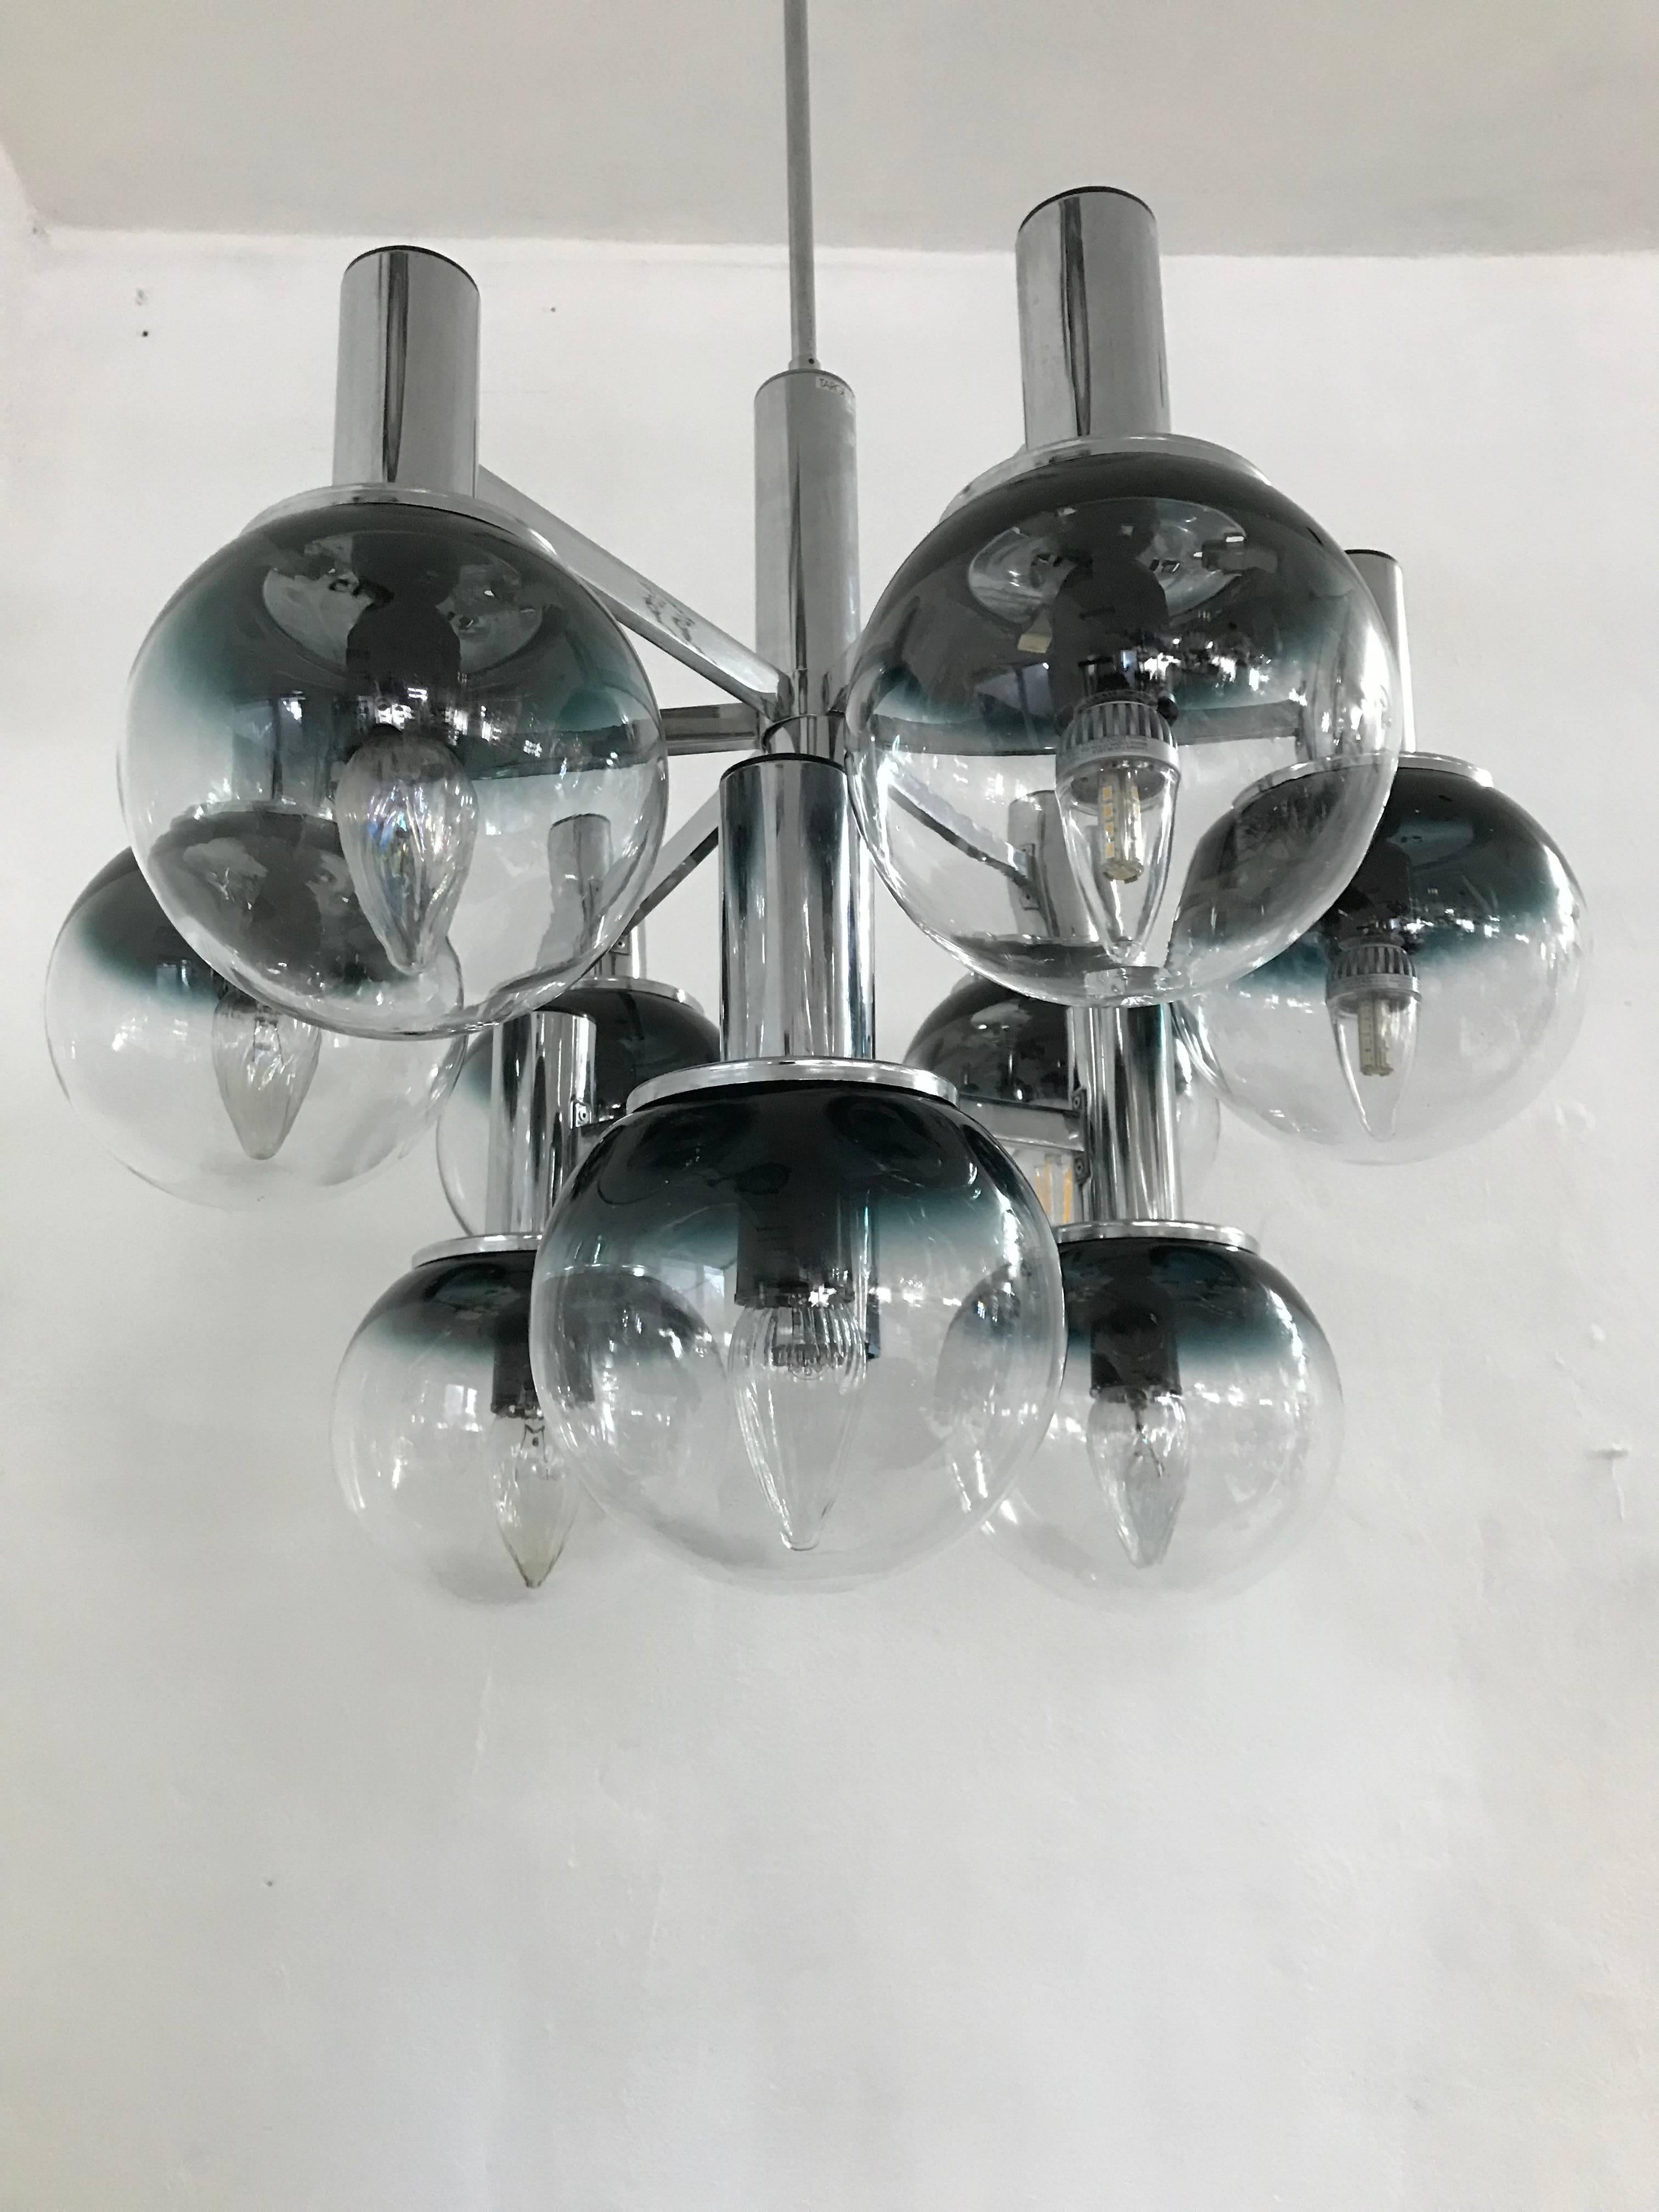 Beautiful 9 light,  Space age chandelier by Targetti Sankey  in chromed metal and Murano clear and smoked (blue) glass.
Retains original sticker.
The diameter of the globes is 19 cm.